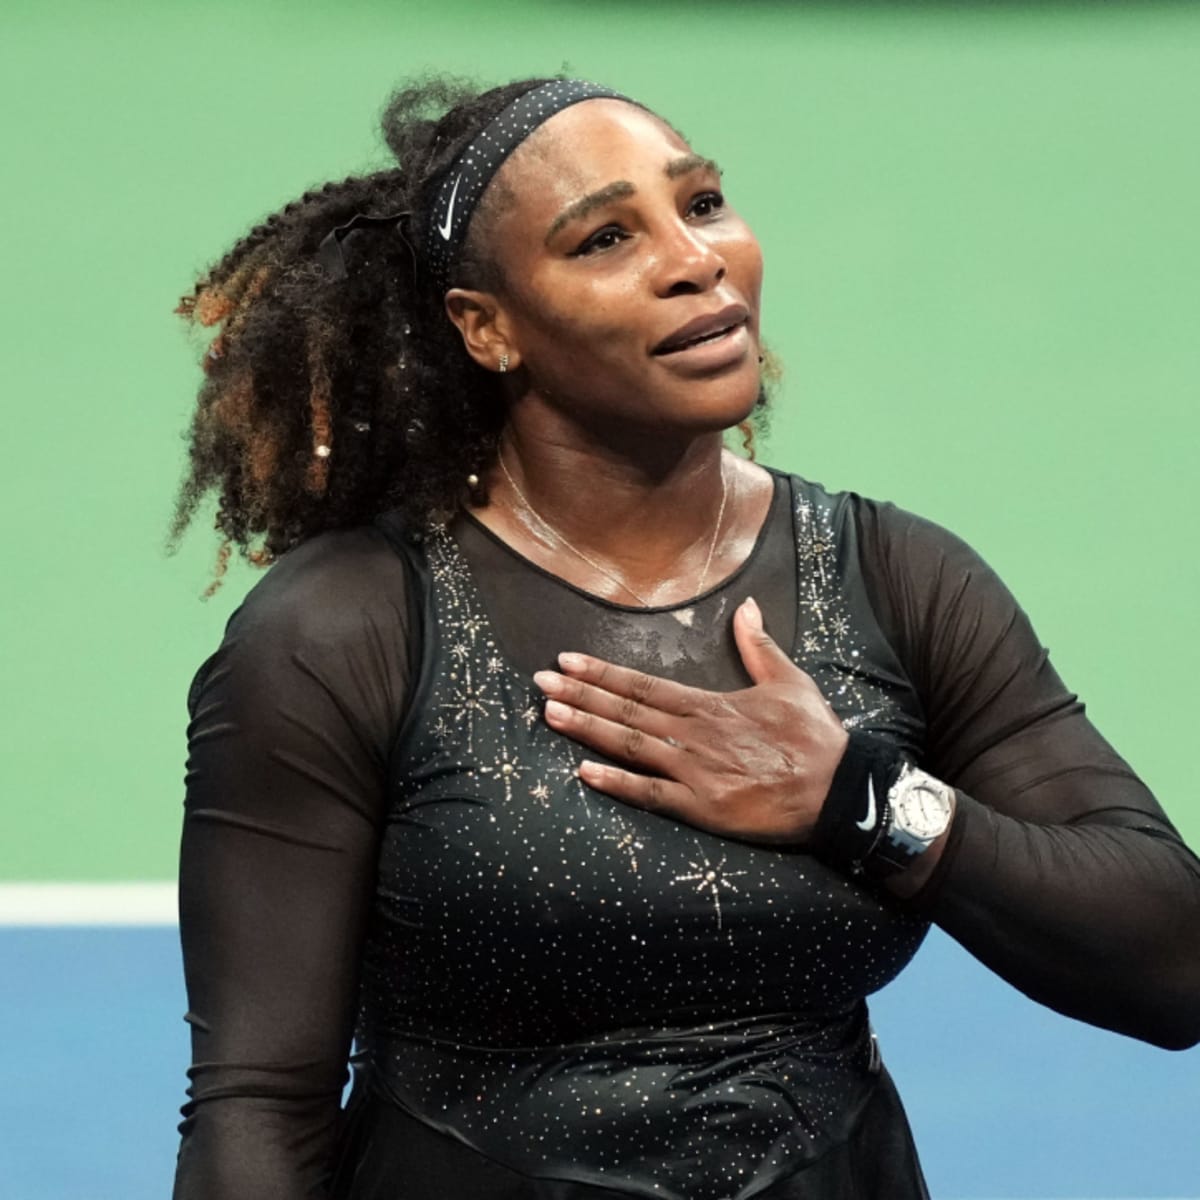 What is Serena Williams' career-high ranking in singles?